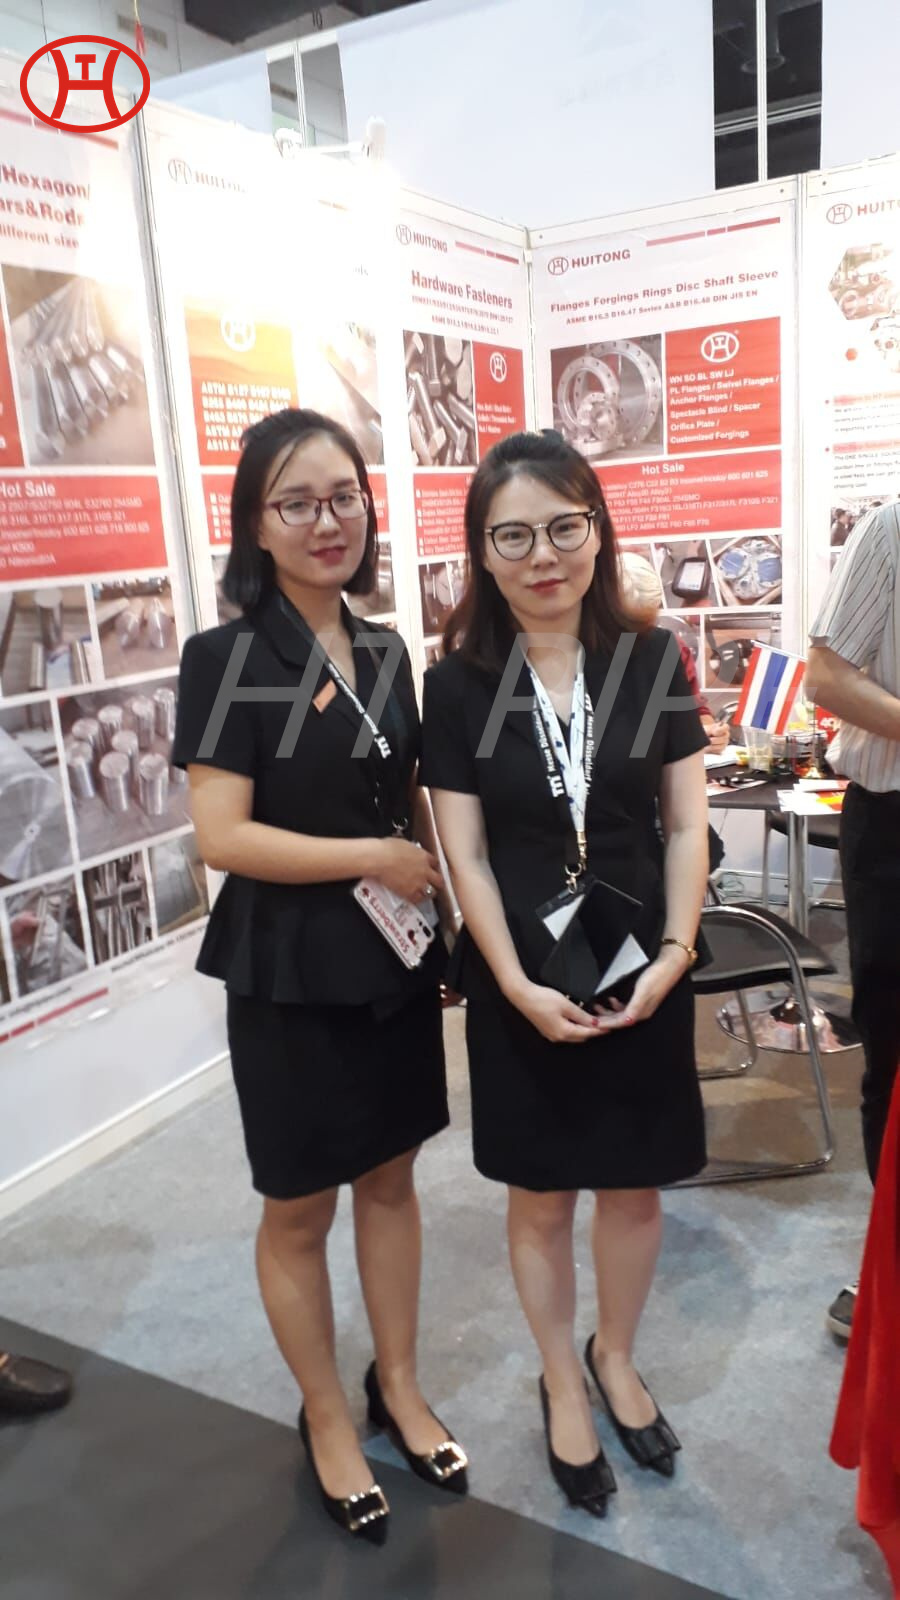 The exhibition of Zhengzhou Huitong nickel alloy inconel 600 601 718 625 pipe fittngs